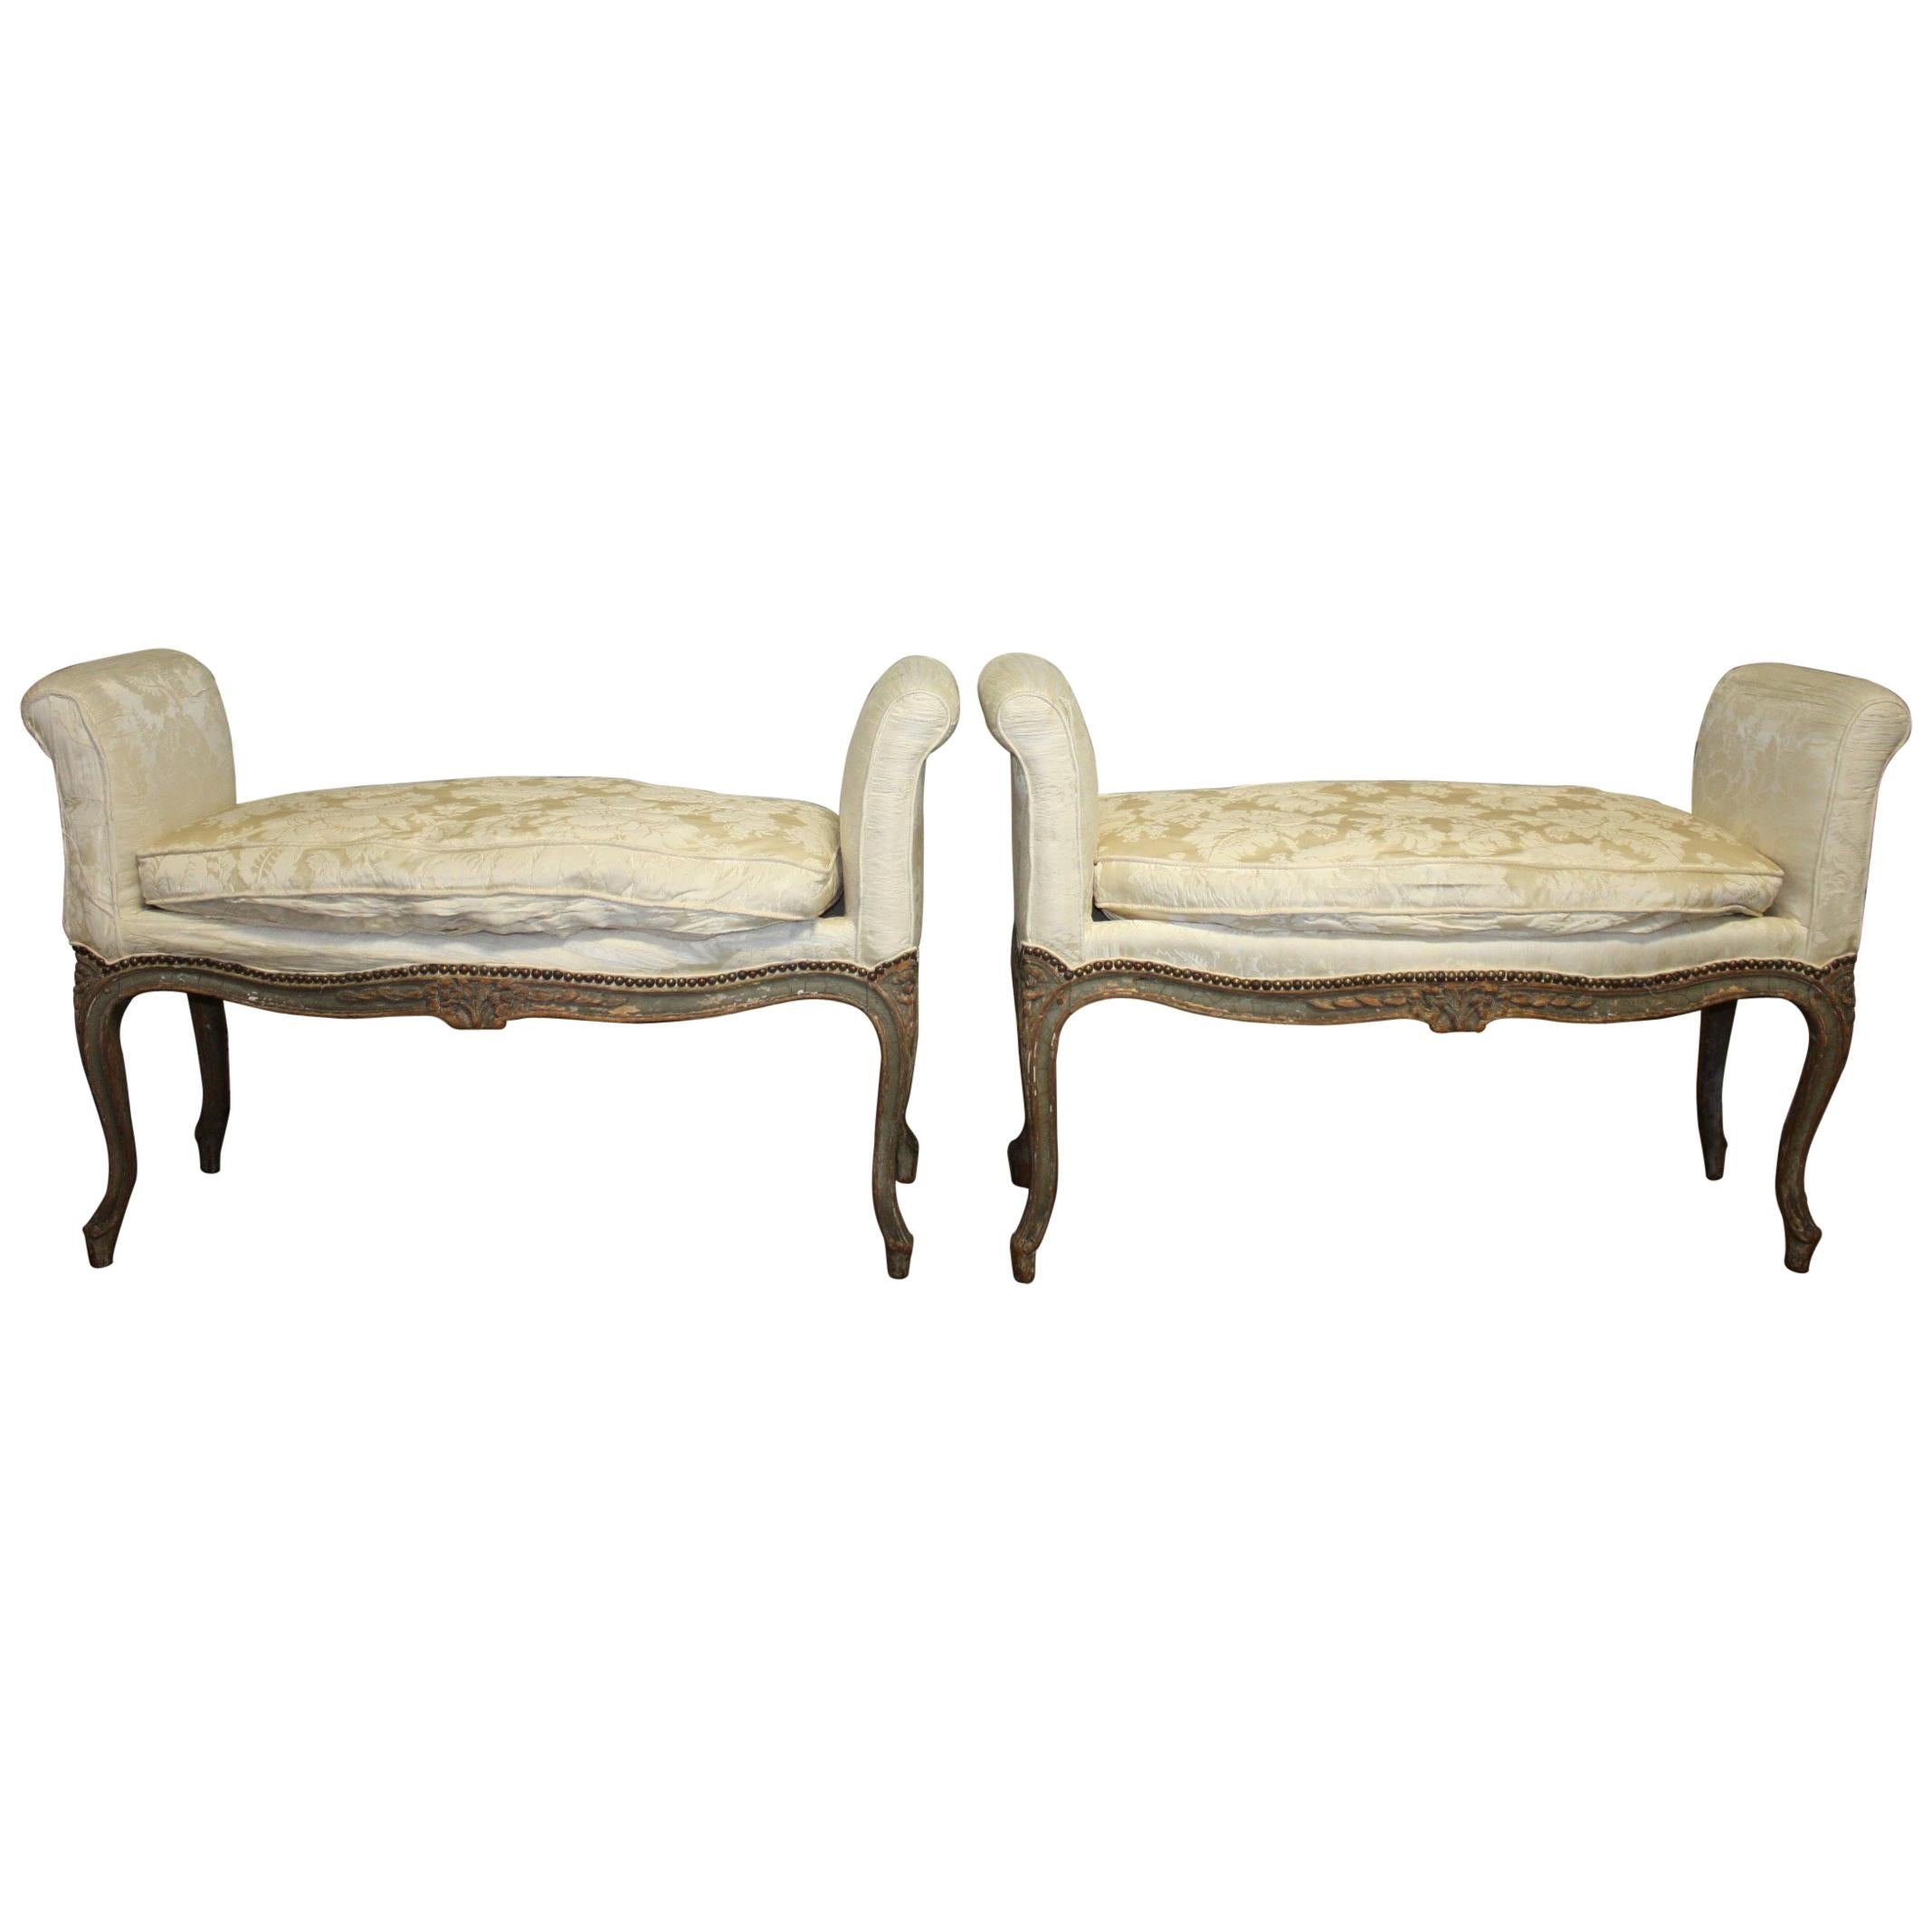 Exquisite 18th Century Pair of French Benches